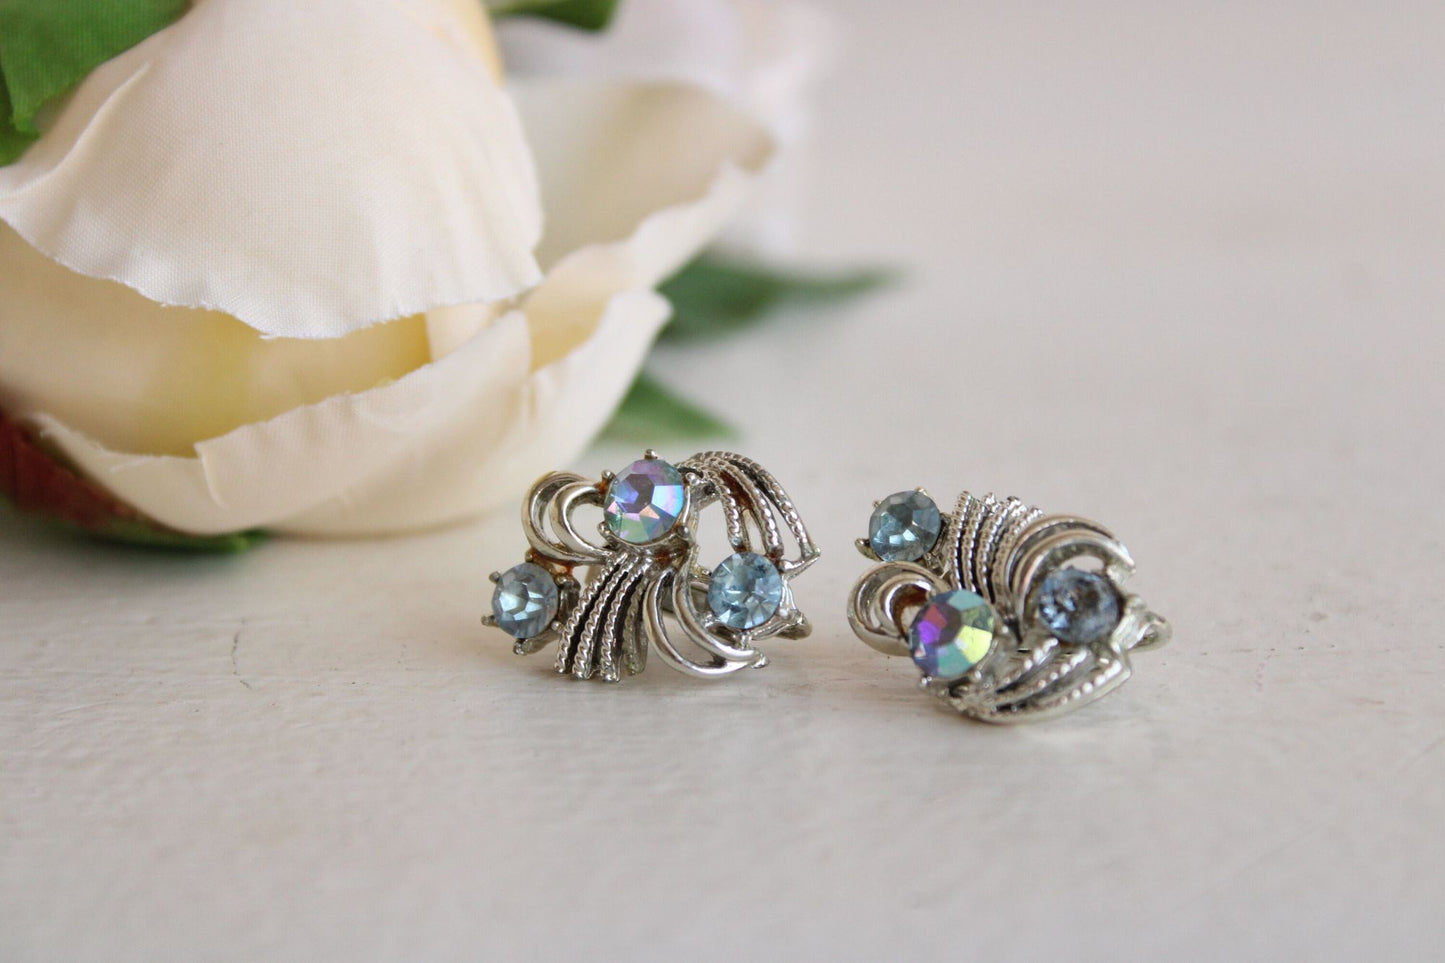 Vintage 1950s 1960s Coro Silver Tone Clip Ons With Pale Blue Rhinestone Center